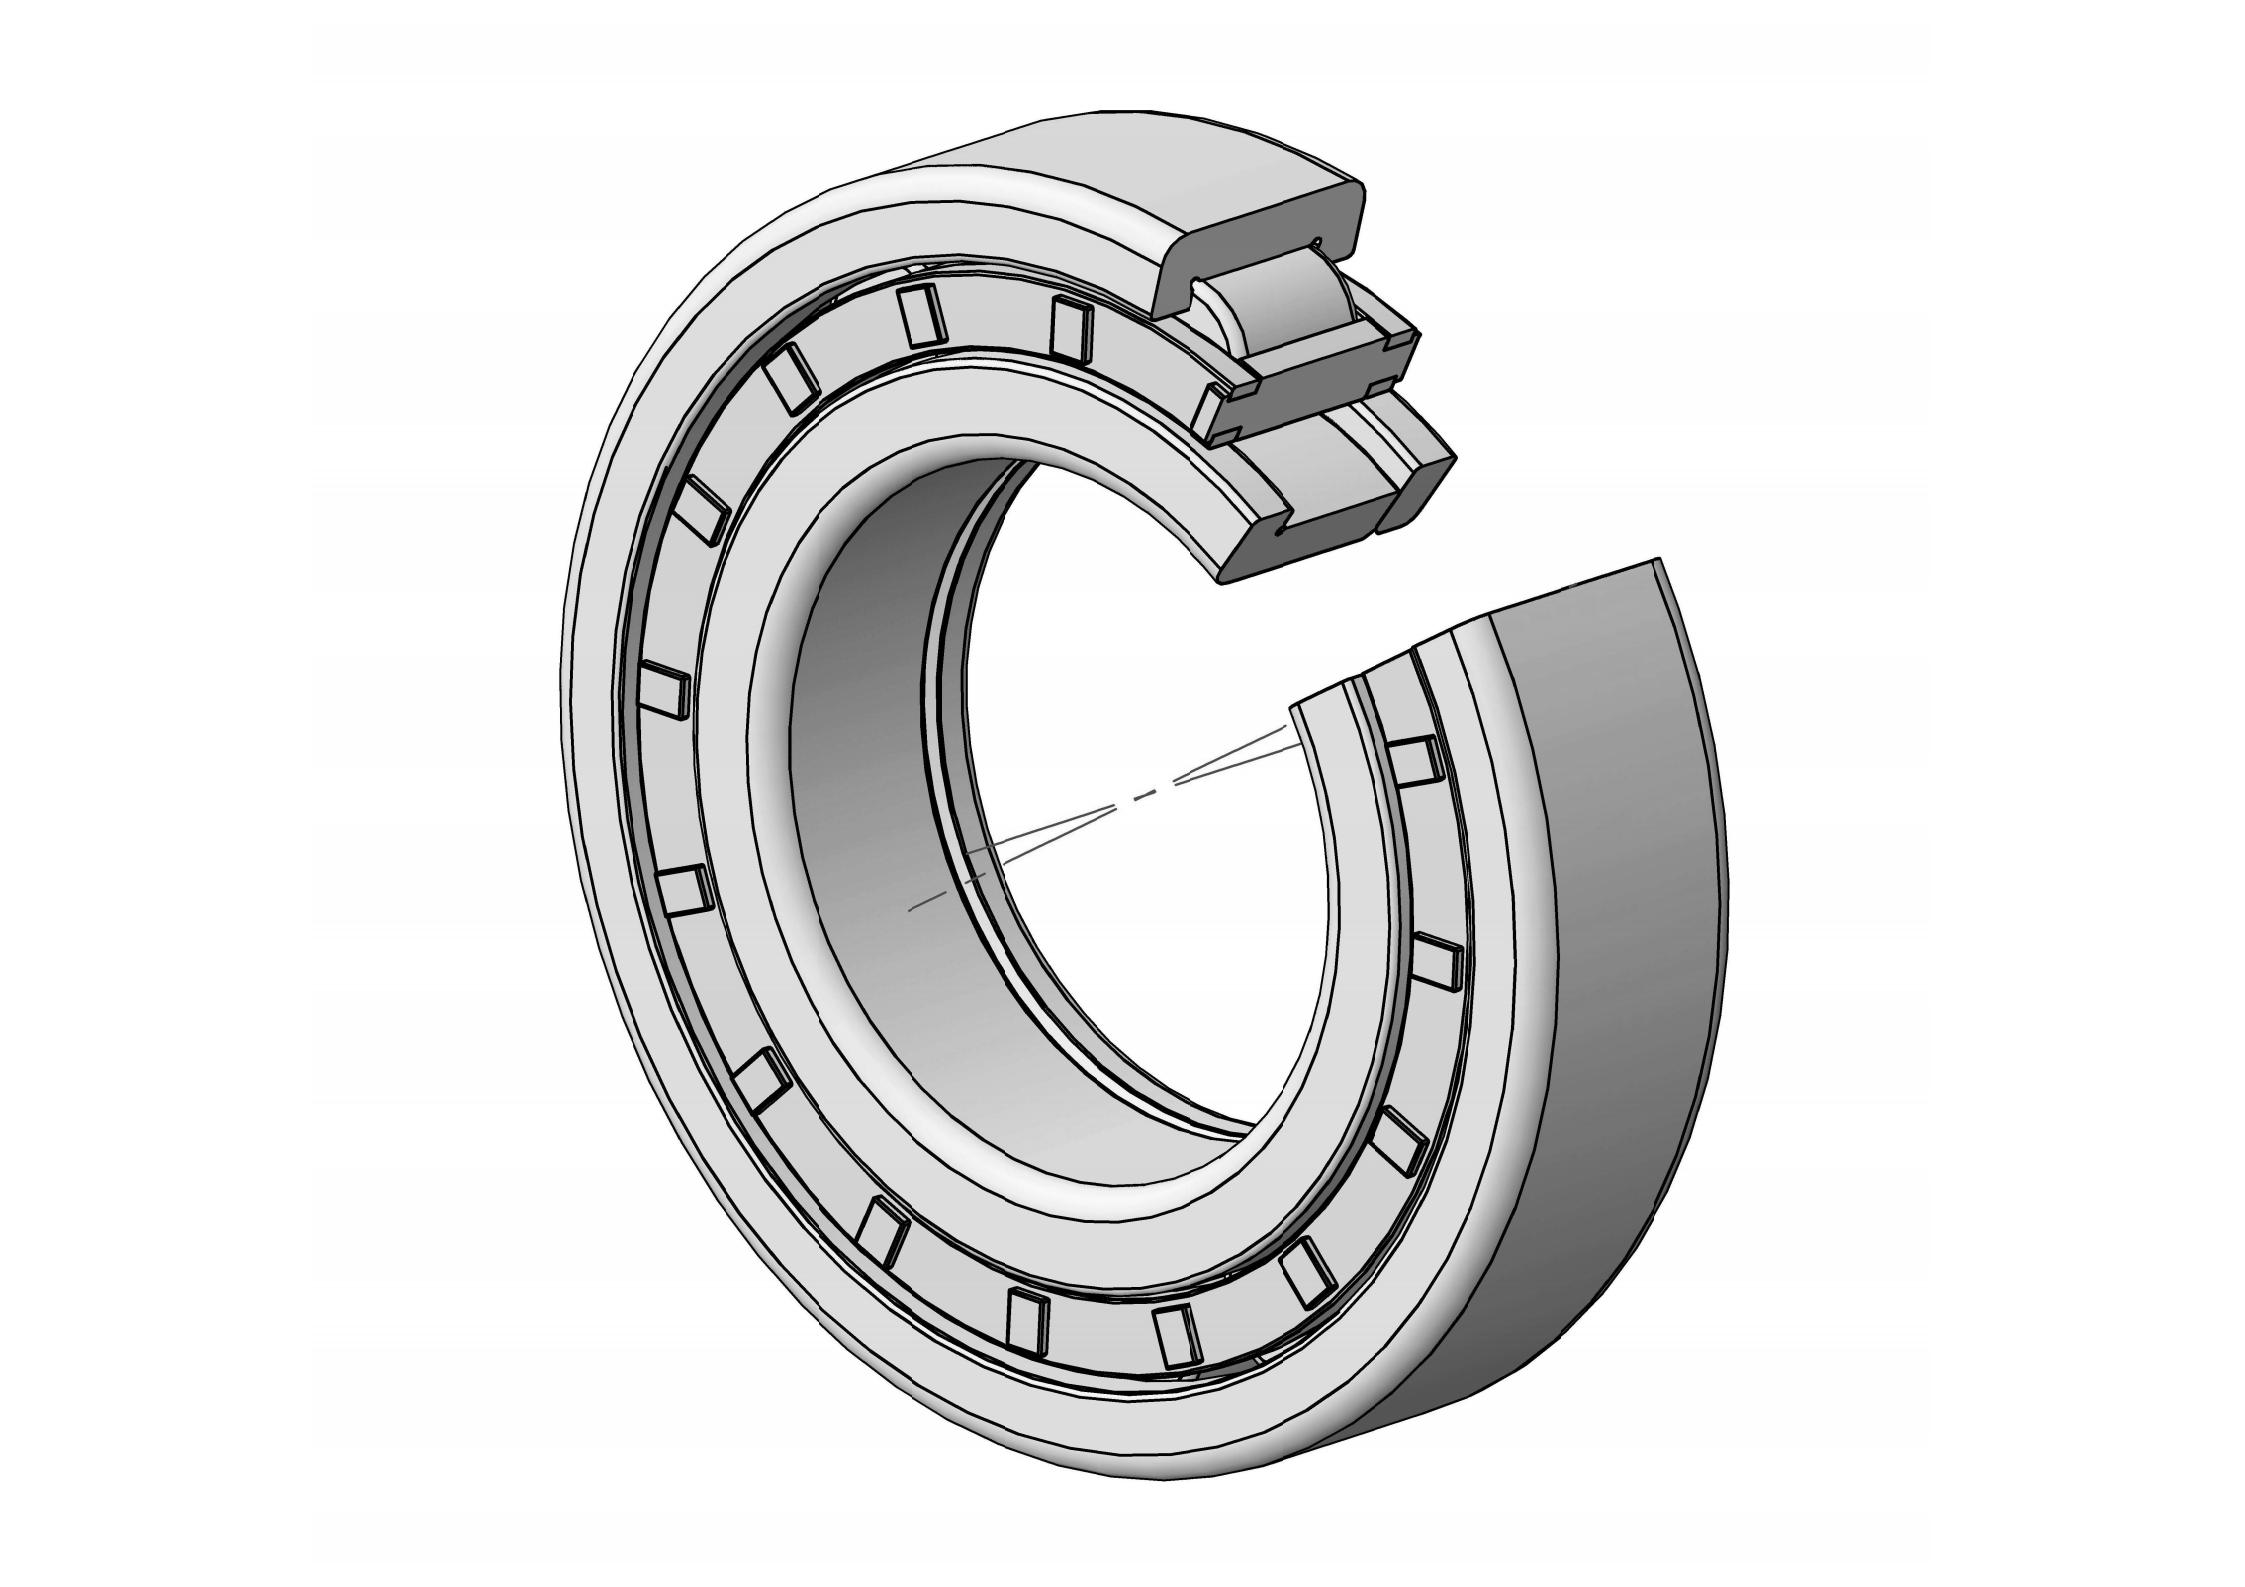 NUP2309-E Single Row Cylindrical roller bearing 